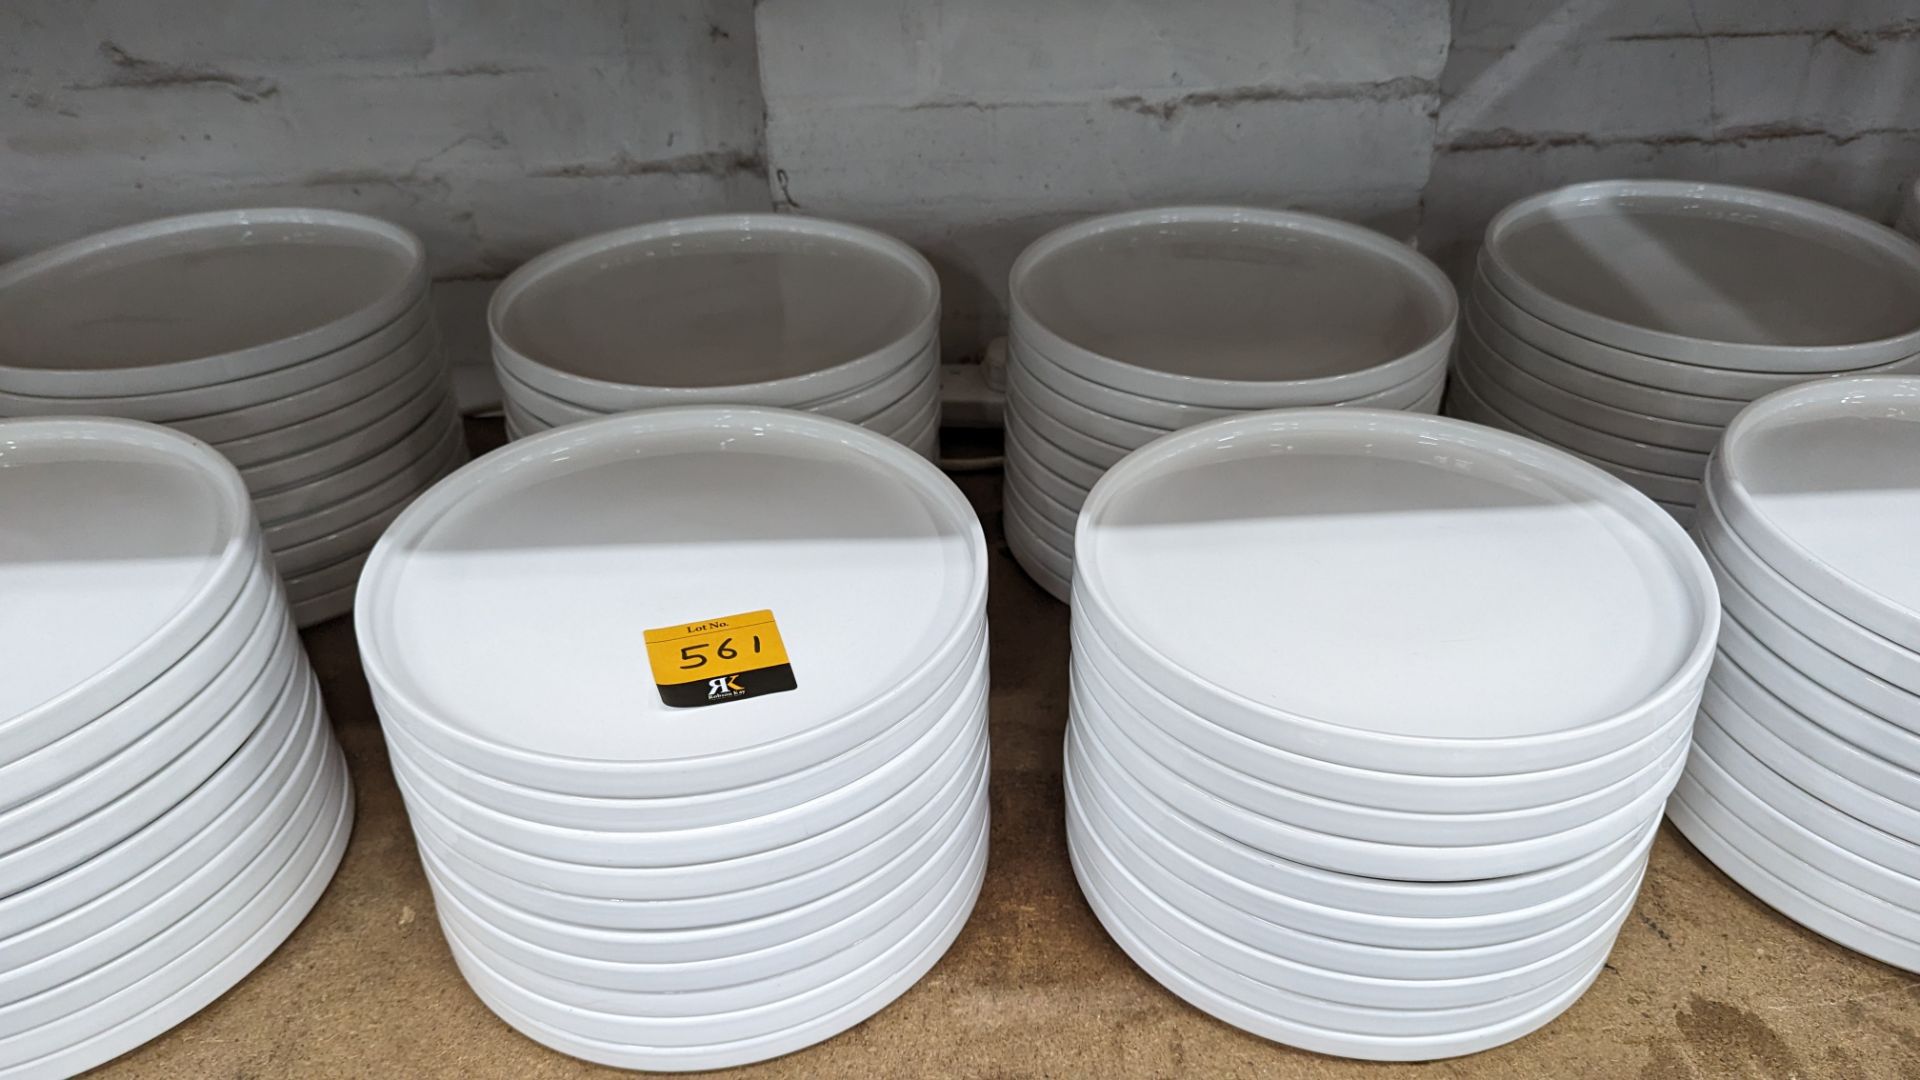 40 off Genware 245mm round flat plates with upright rim to the outer edge - Image 2 of 7